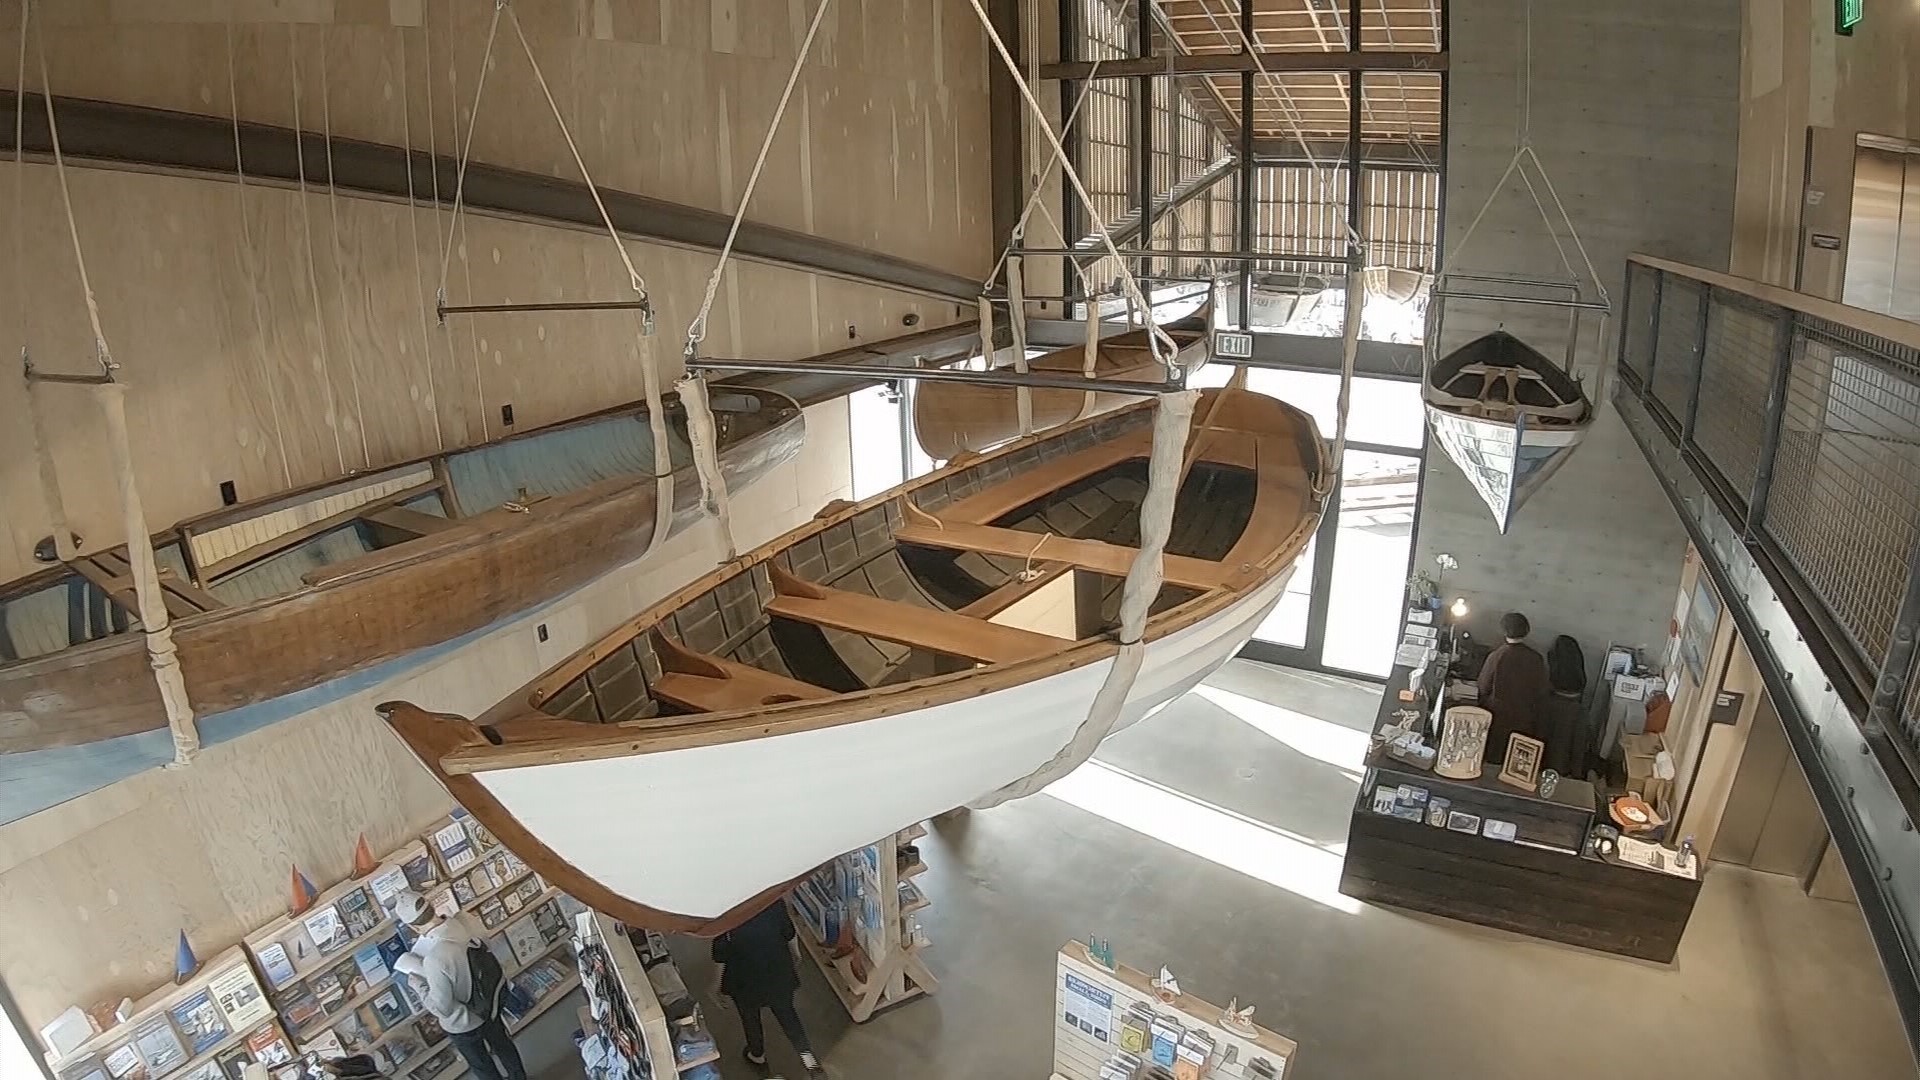 The new space offers more room for visitors to learn and experience Seattle's maritime heritage.